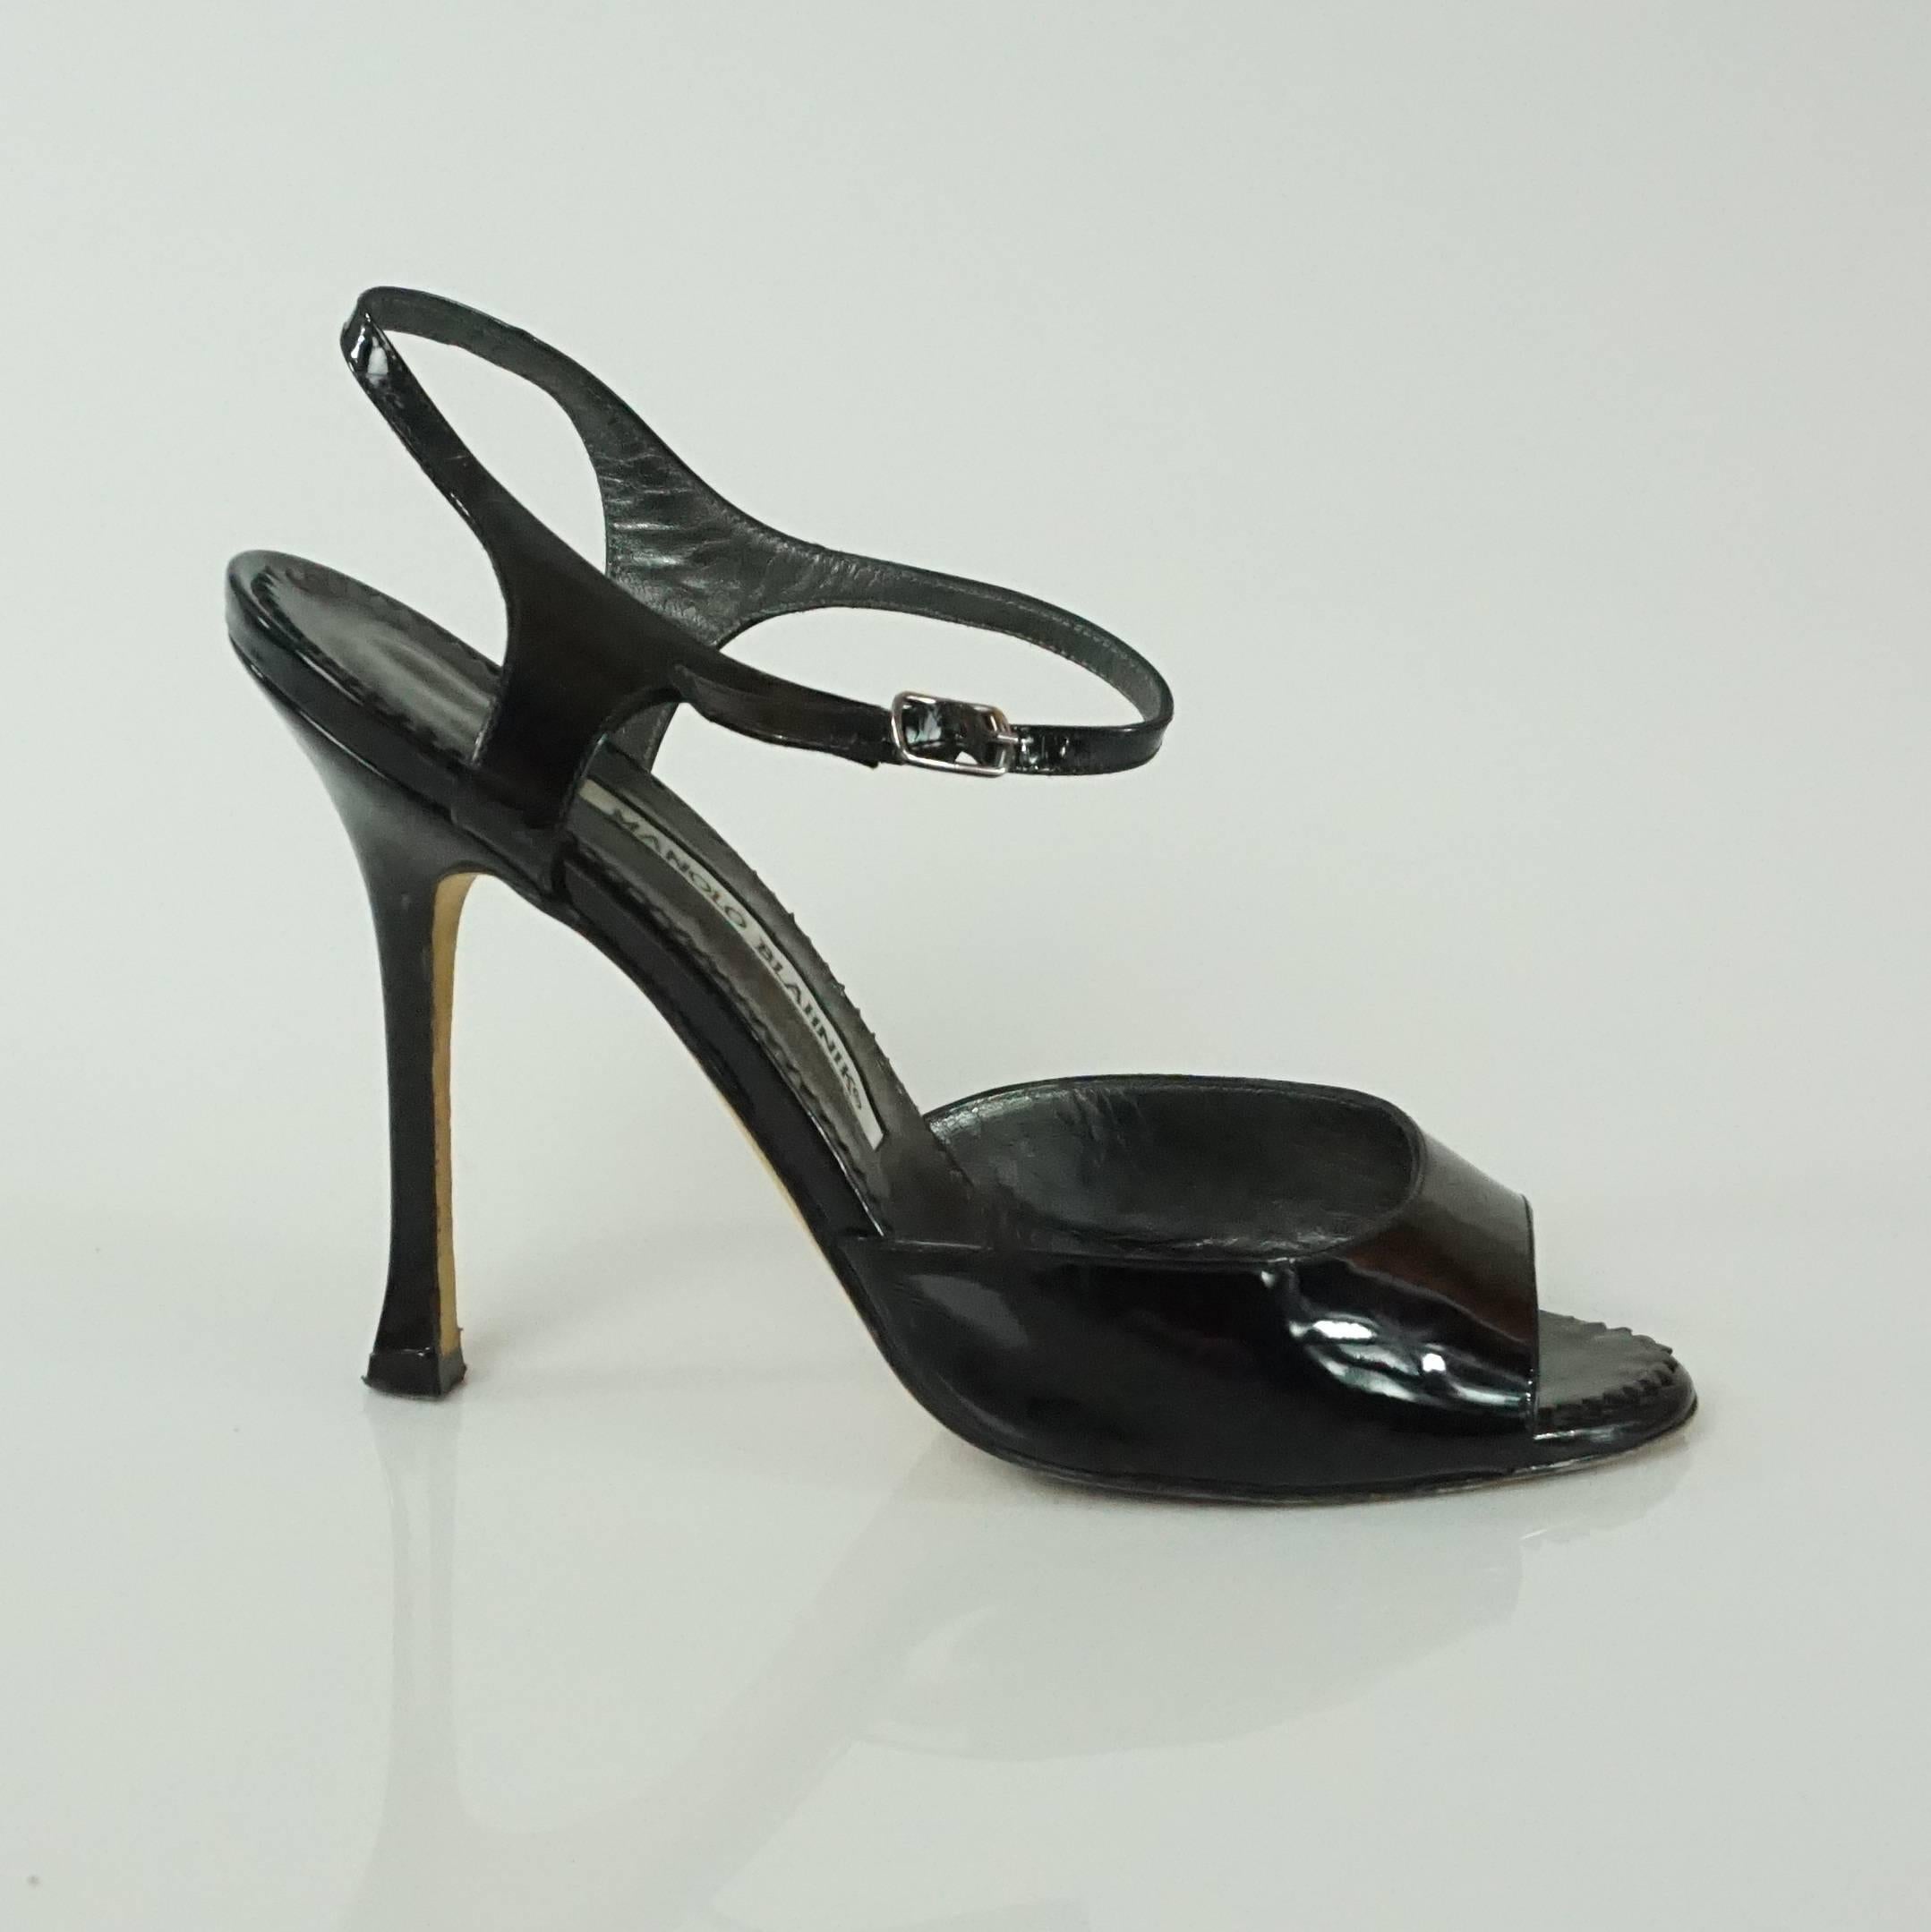 These Manolo Blahnik open toe black heels have an ankle strap and a silver buckle on the strap. A duster is included. They are in excellent condition with some bottom wear.

Measurements
Platform: 0.25